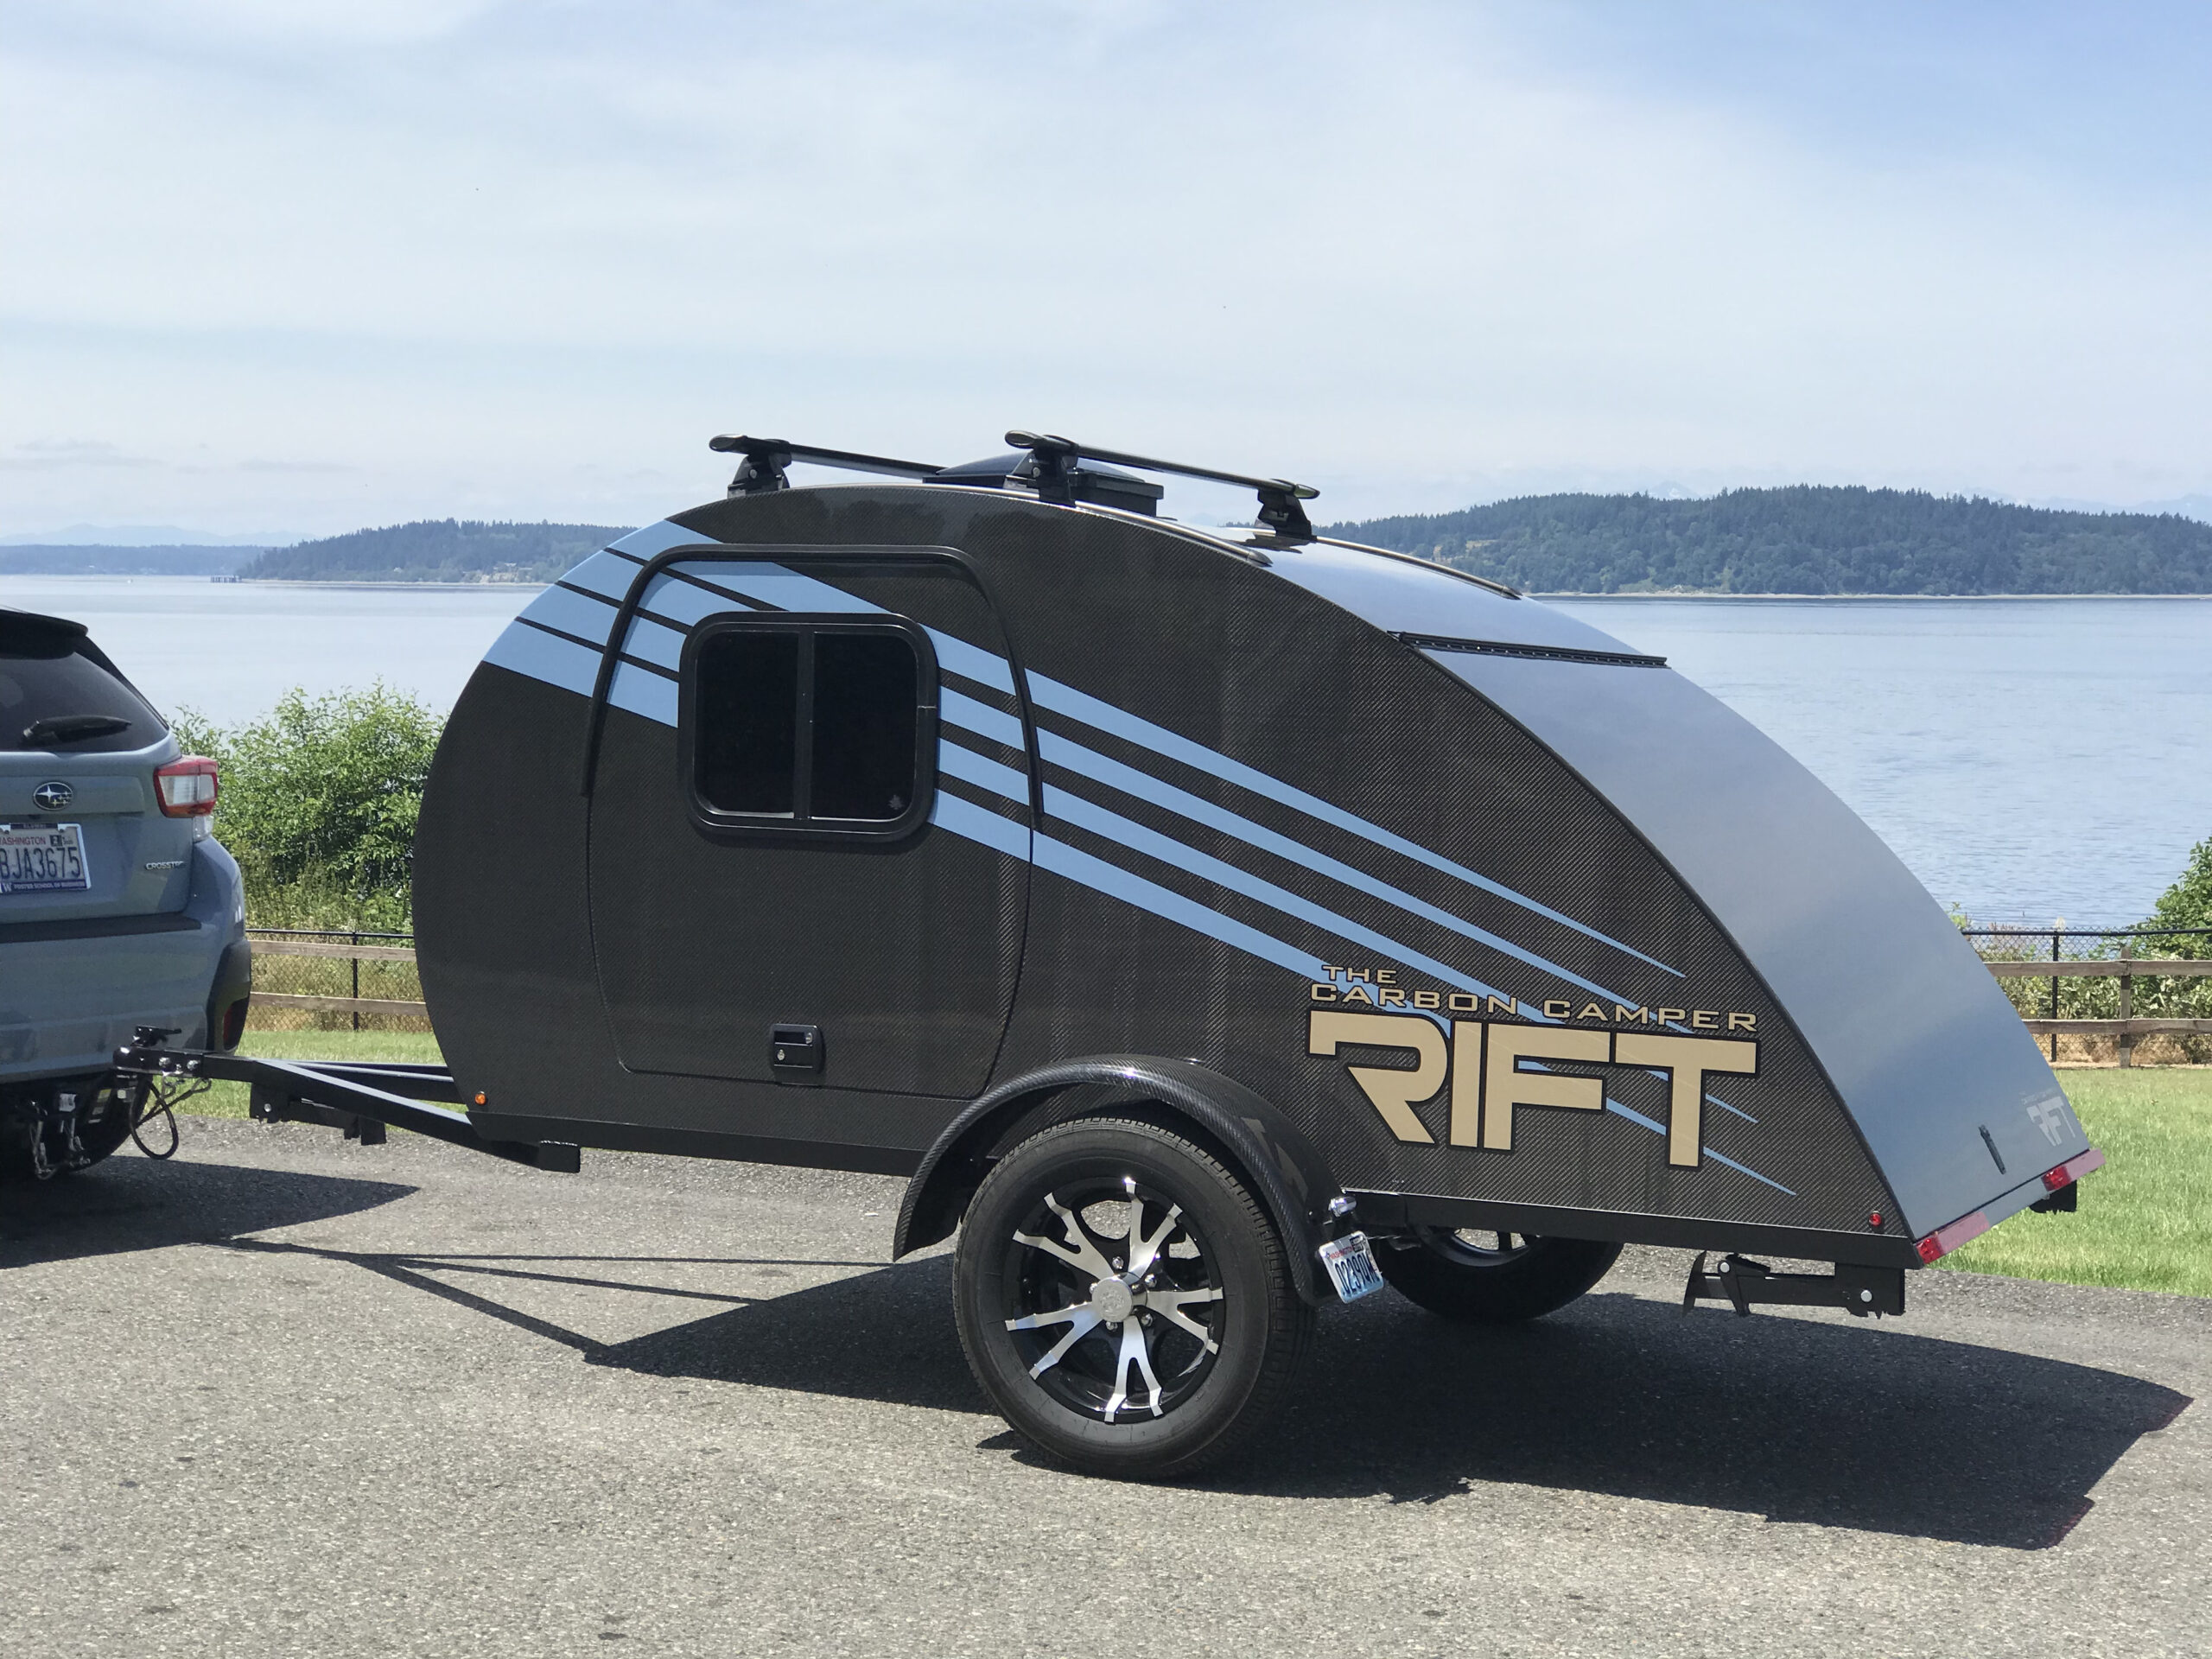 Carbon Lite Trailers Manufactures a Unique Carbon Fiber Teardrop Style Trailer, Weighing Less Than Half of Its Competitors 3